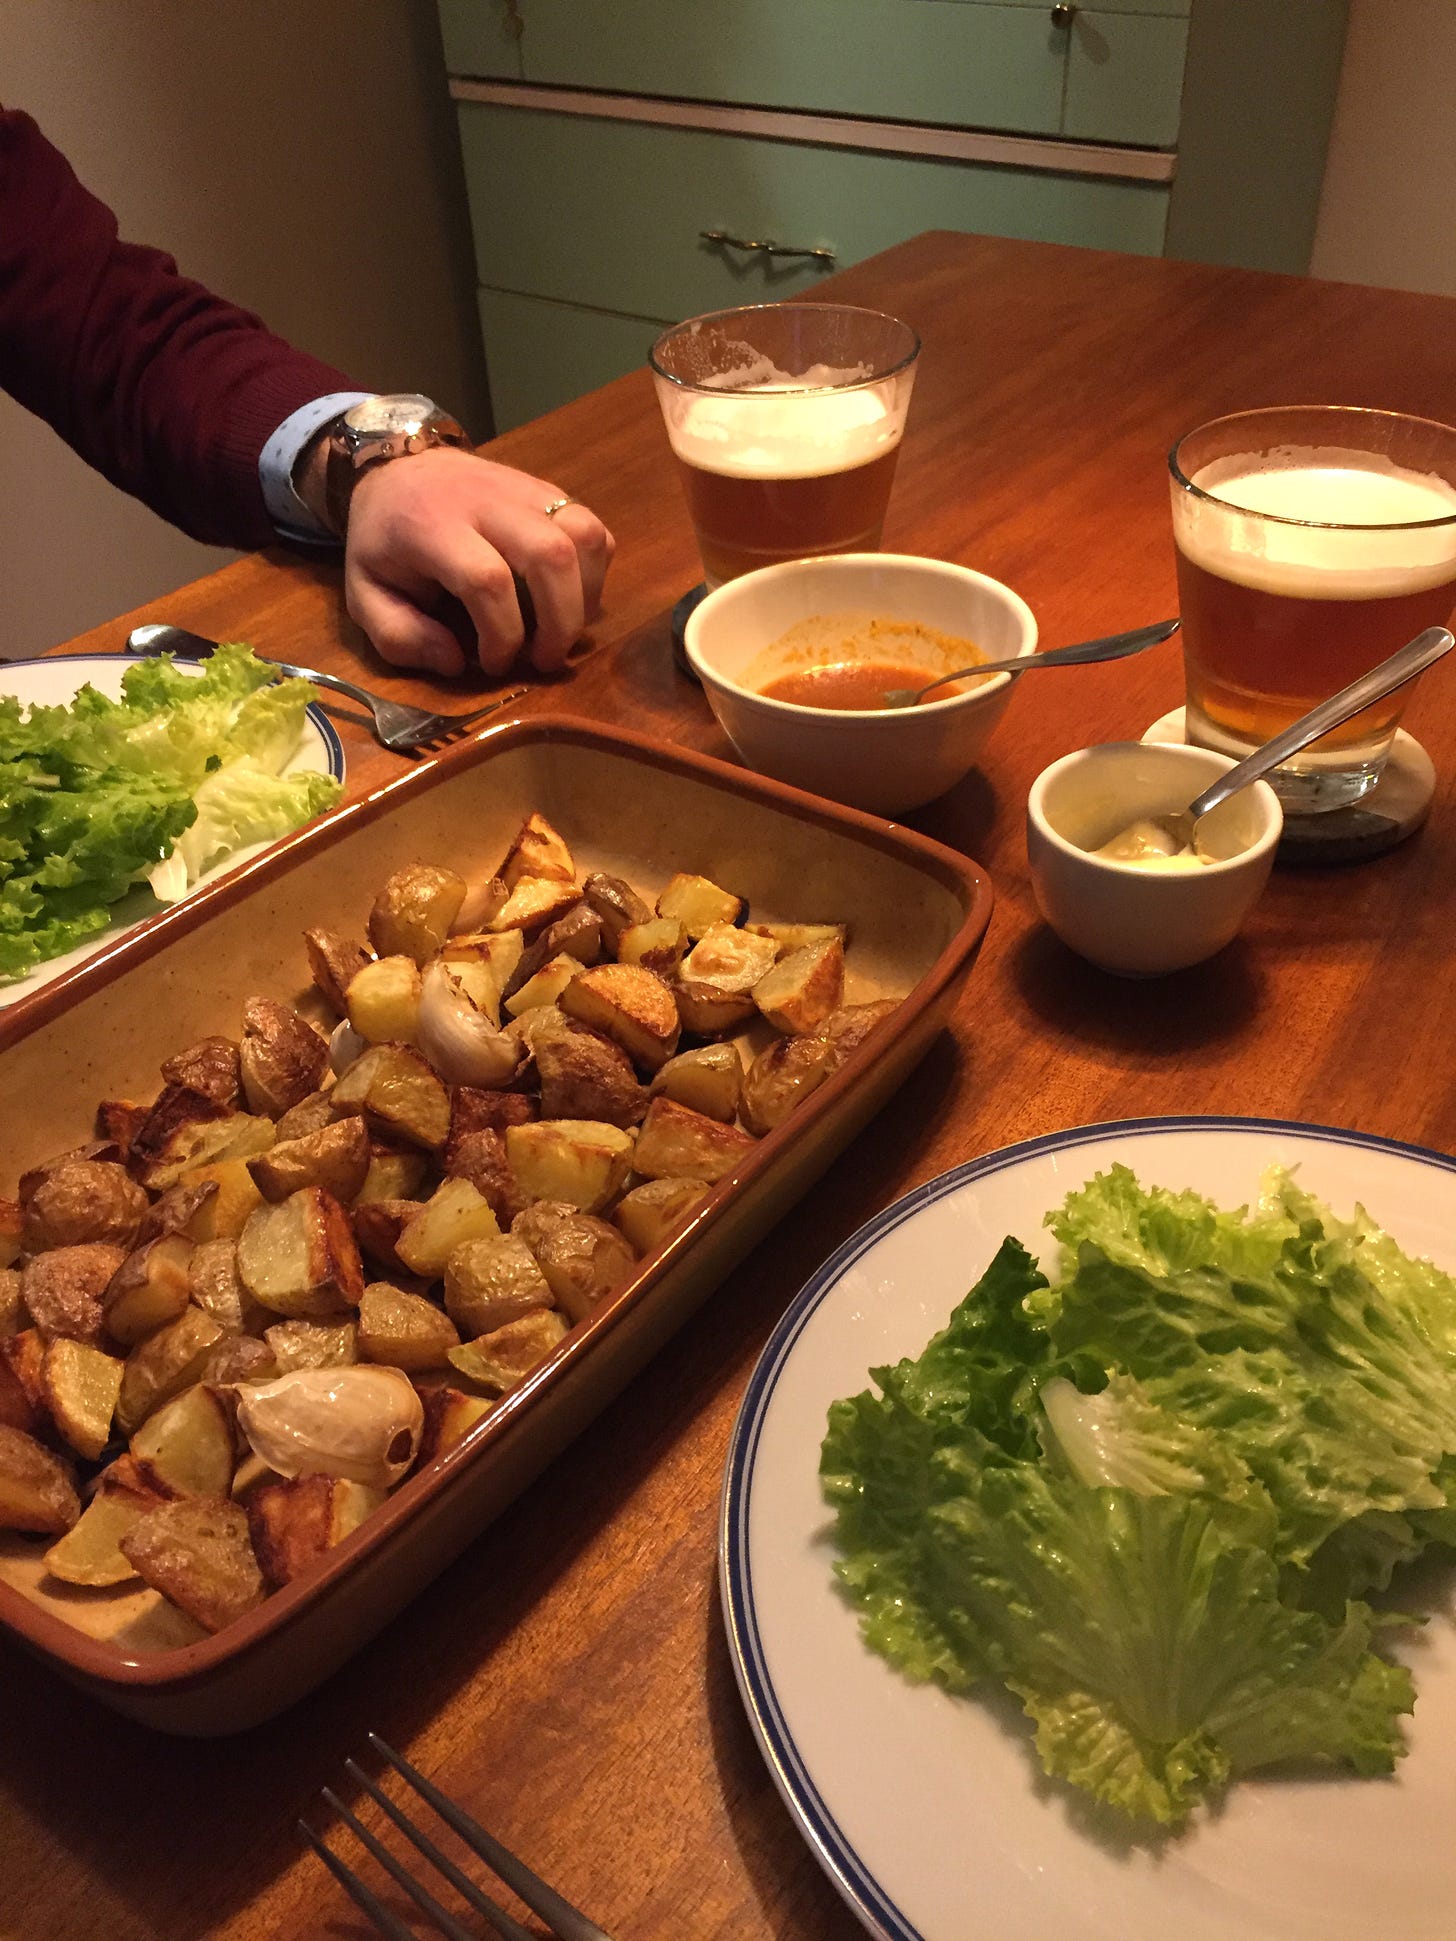 a square pan full of crispy potato pieces and whole cloves of roasted garlic. Two plates of green salad sit opposite. In the background are a dish of salsa brava and a dish of garlic mayo with spoons in them, and two glasses of beer on coasters.